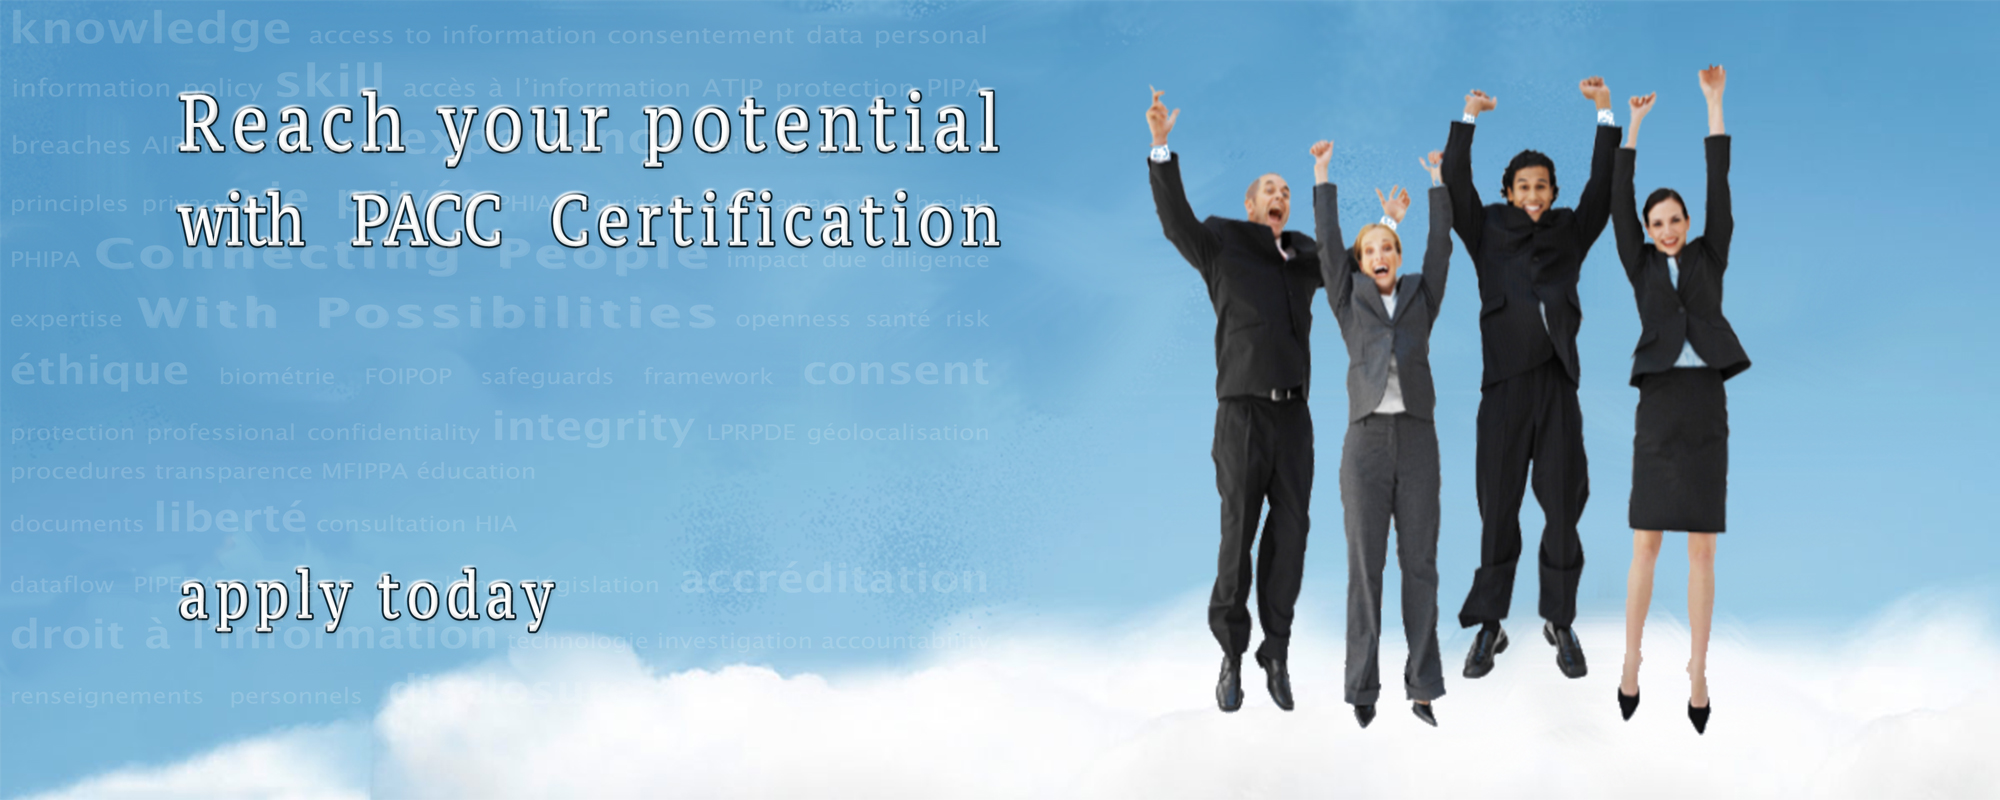 Reach your potential with PACC Professional Certification